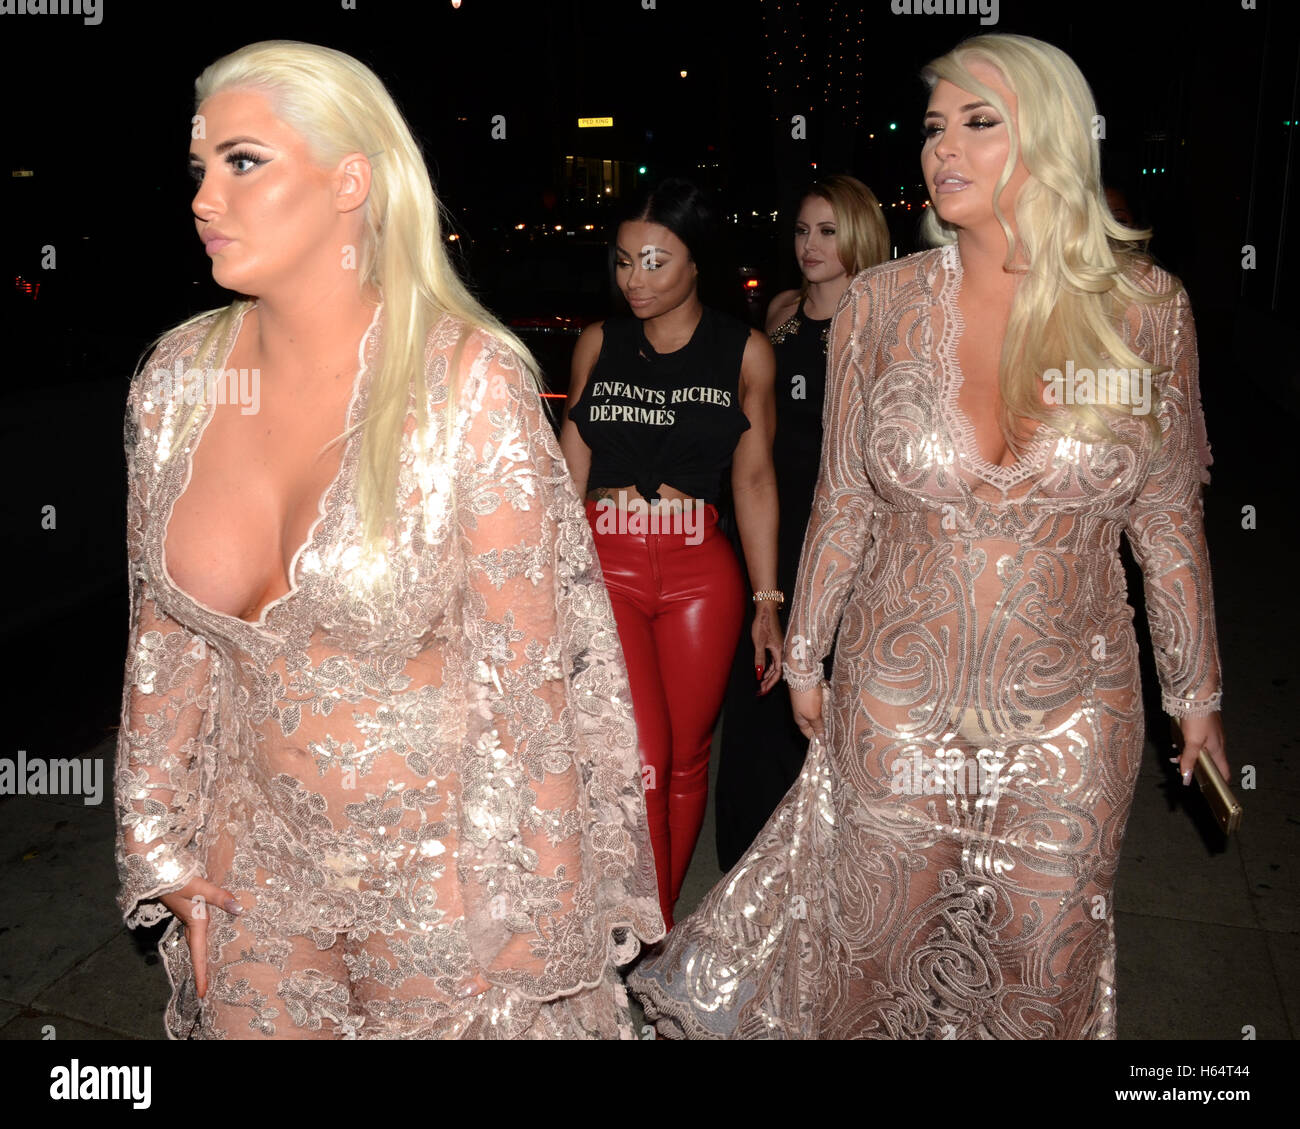 Kristina Shannon, Blac Chyna and Karissa Shannon arrives at the GLAM Beverly Hills Salon Grand Opening celebration and Ribbon Cutting ceremony in Bevrly Hills California on November 19, 2015. Stock Photo